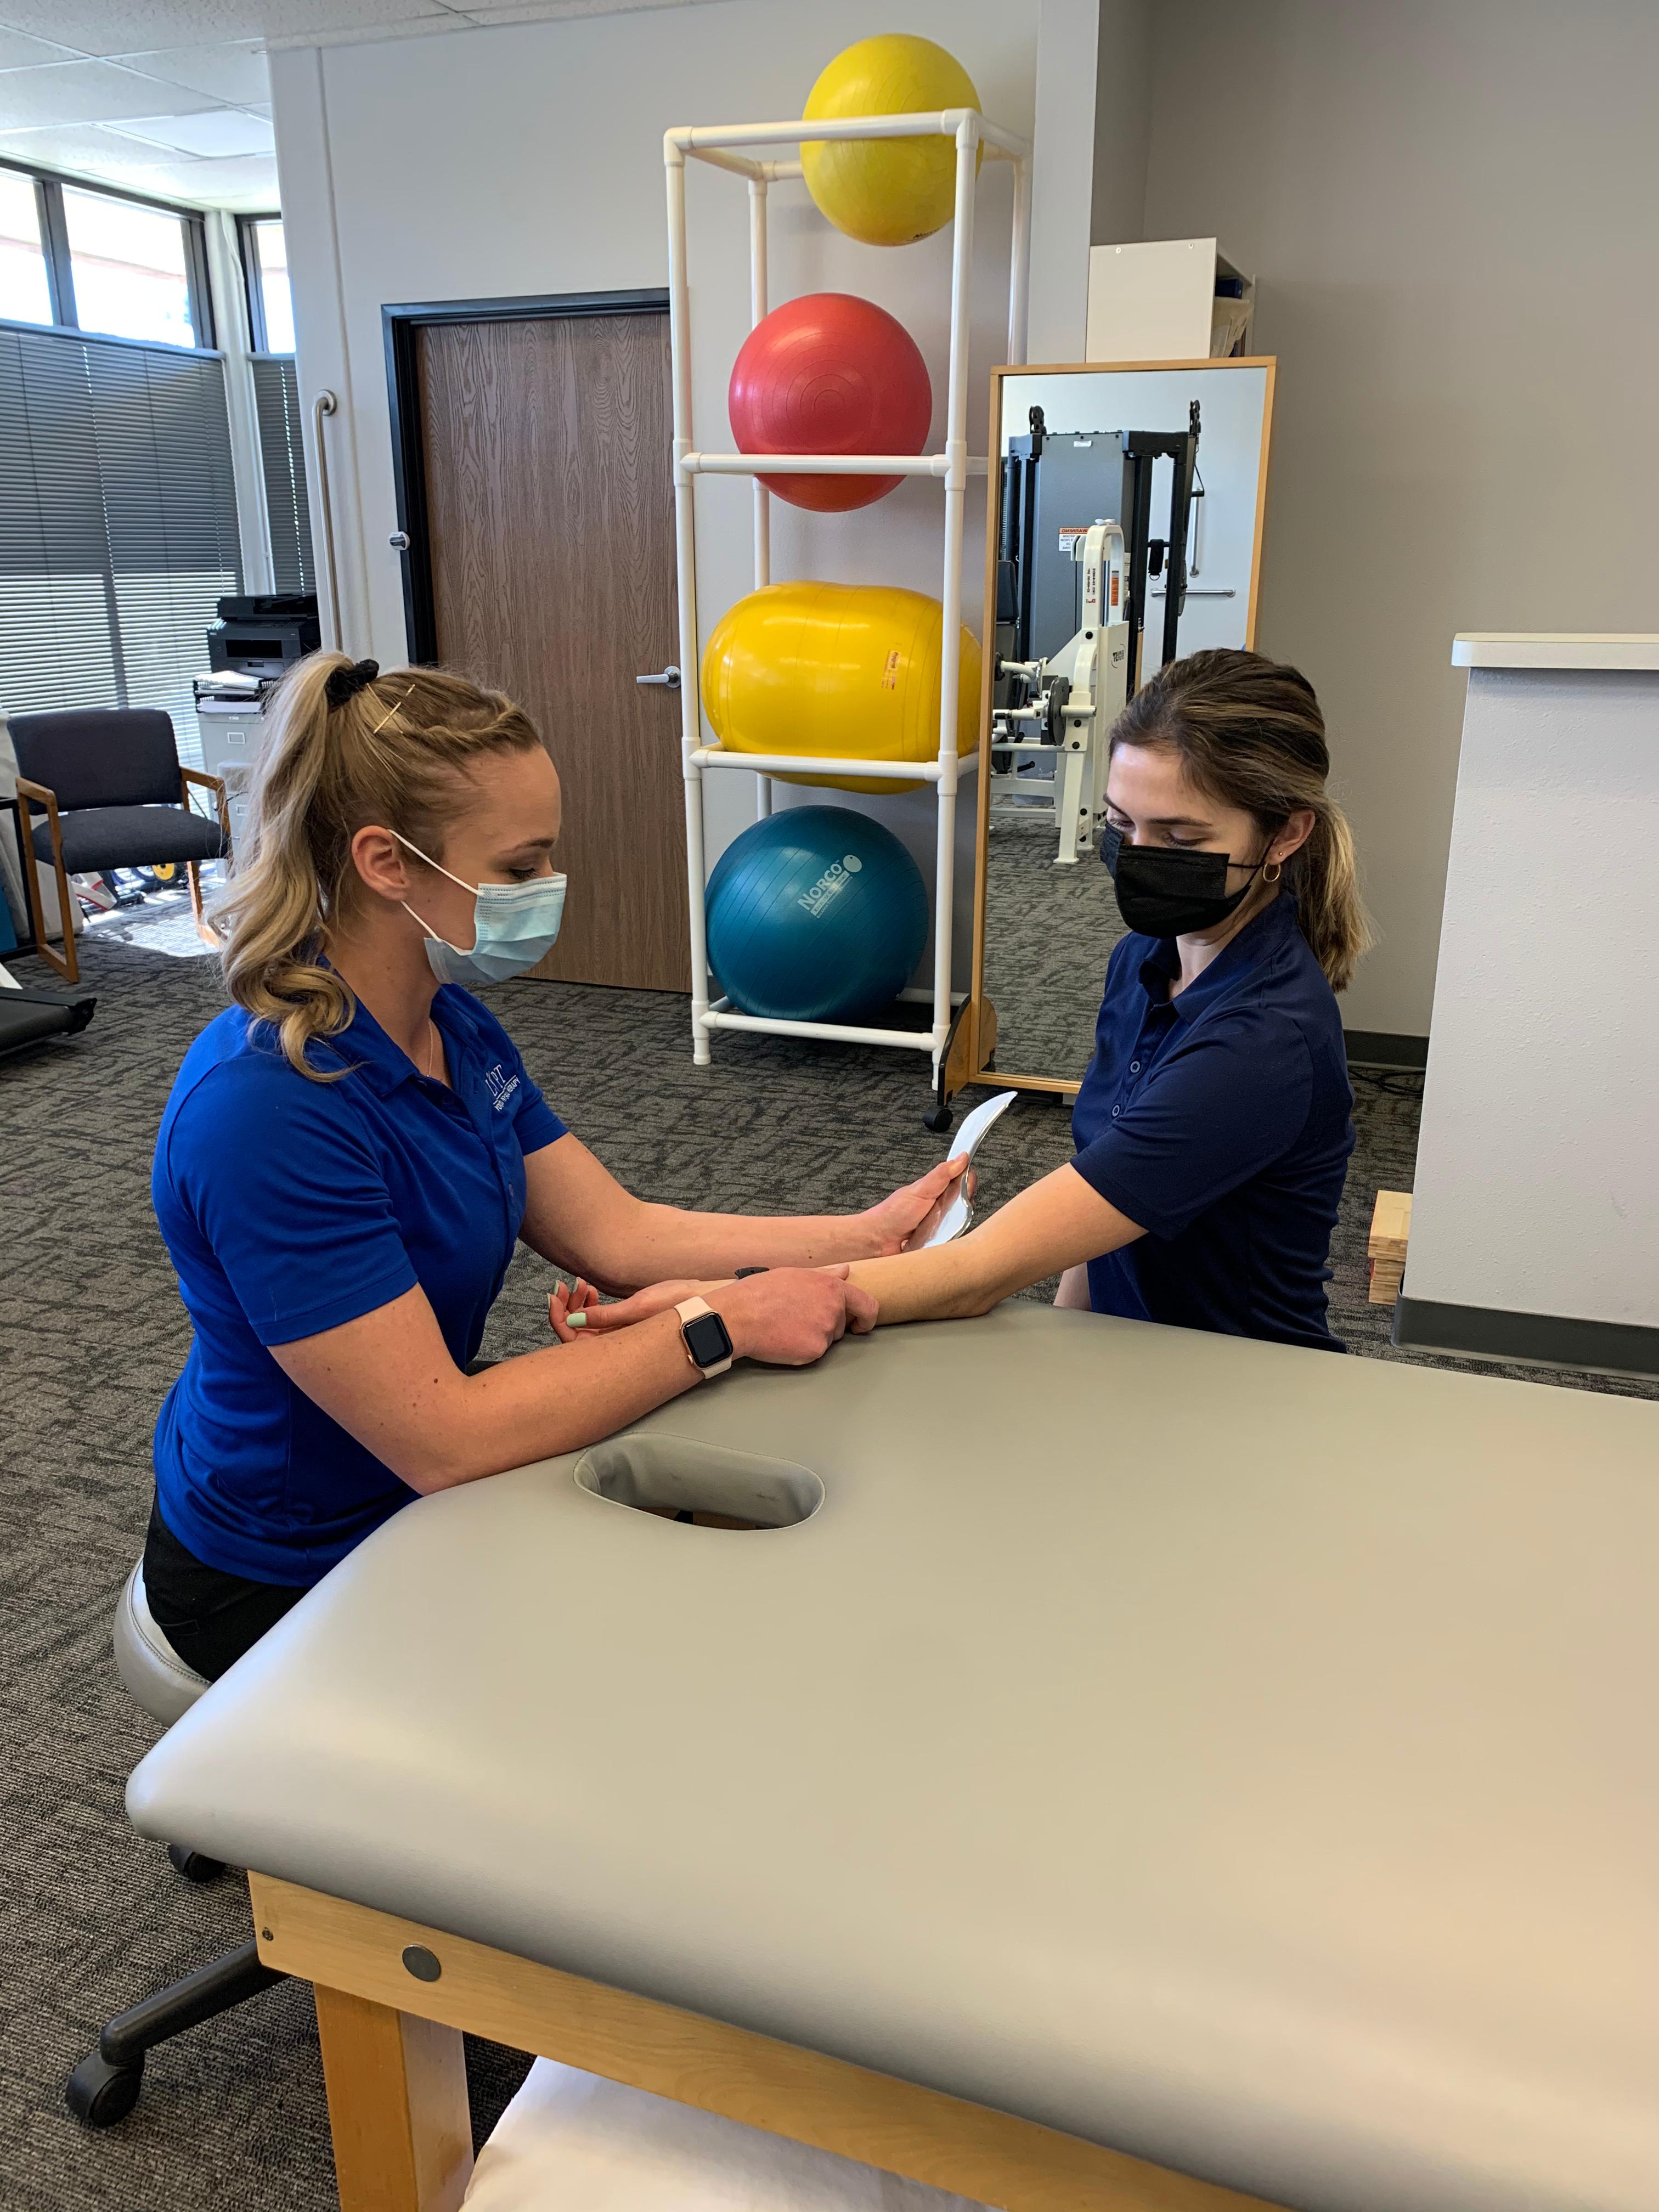 Yorba Linda Physical Therapy is a proud affiliate of California Rehabilitation and Sports Therapy located at
16615 Yorba Linda Blvd., Yorba Linda, CA